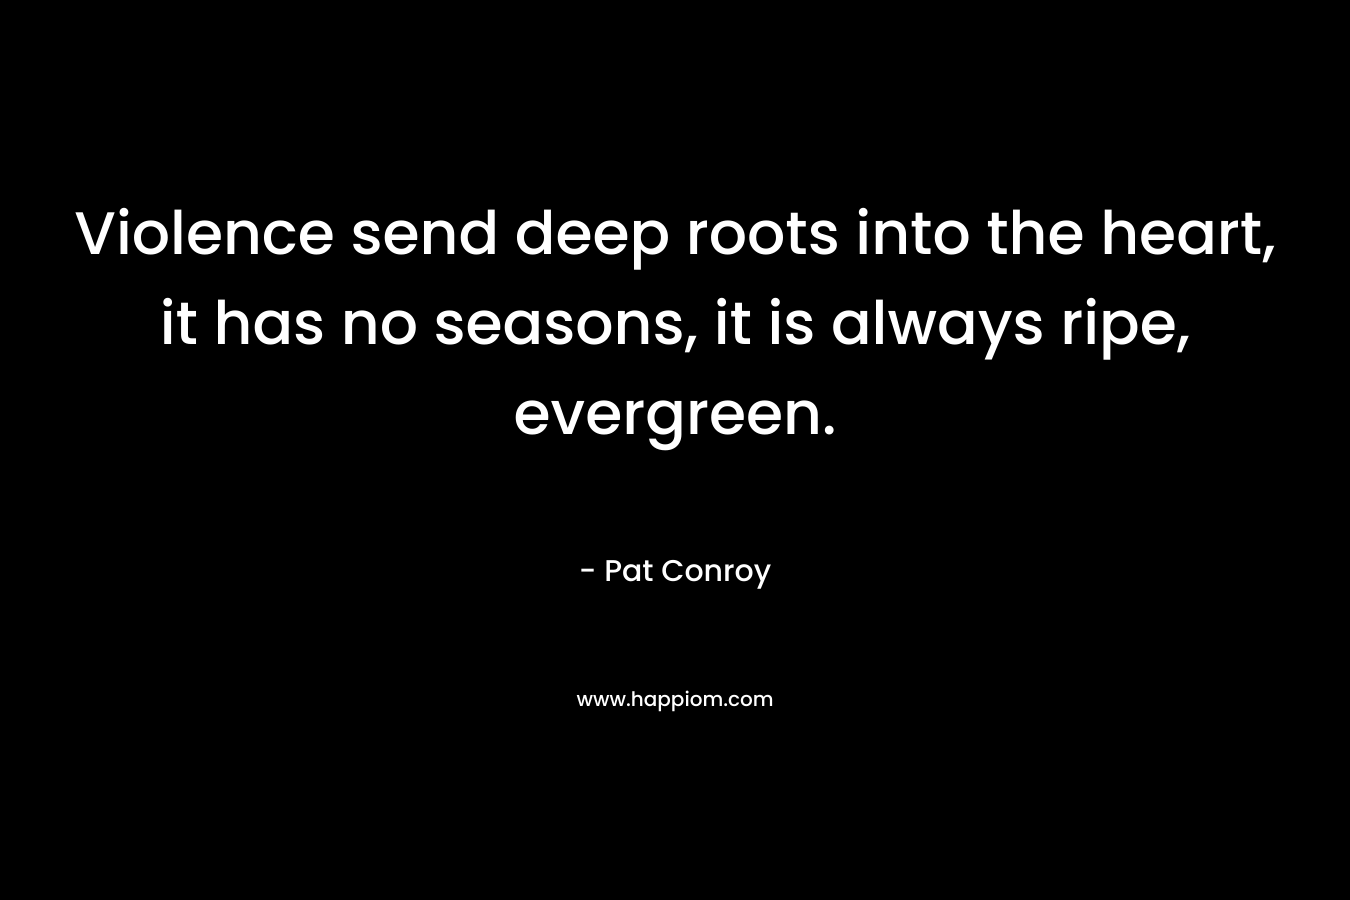 Violence send deep roots into the heart, it has no seasons, it is always ripe, evergreen. – Pat Conroy